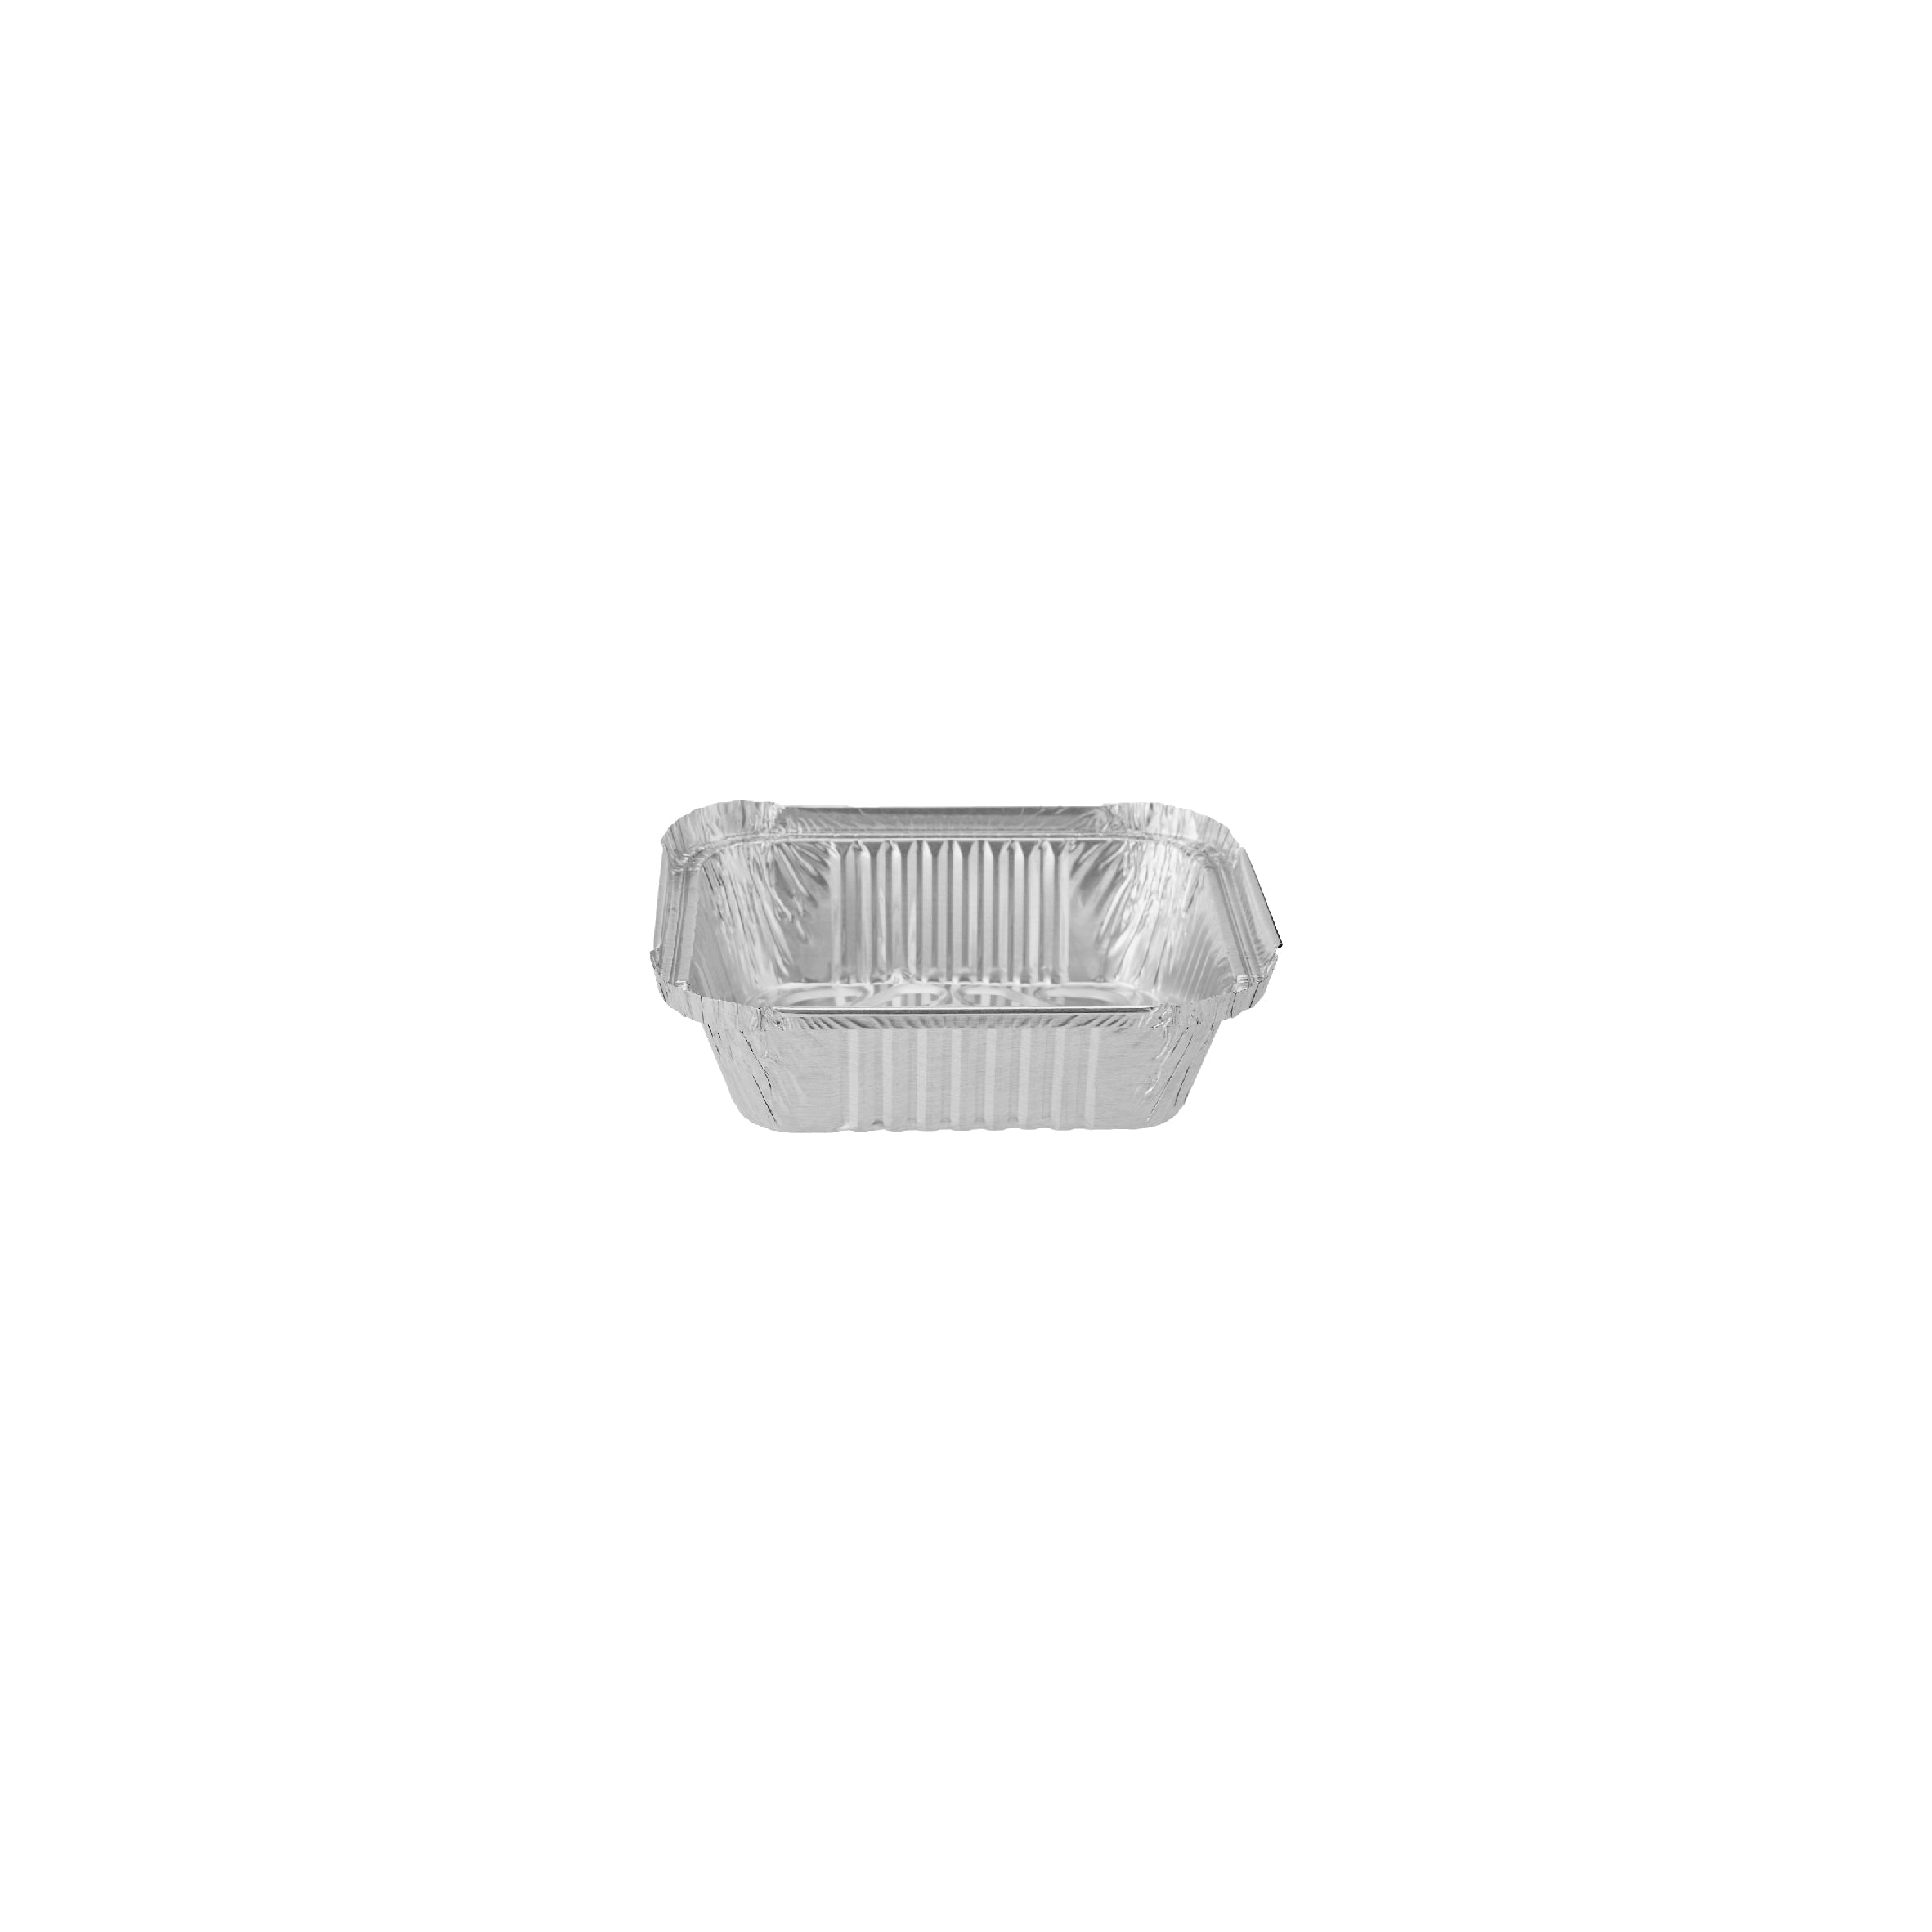 Recyclable 8342 aluminium takeout container - Hotpack Global